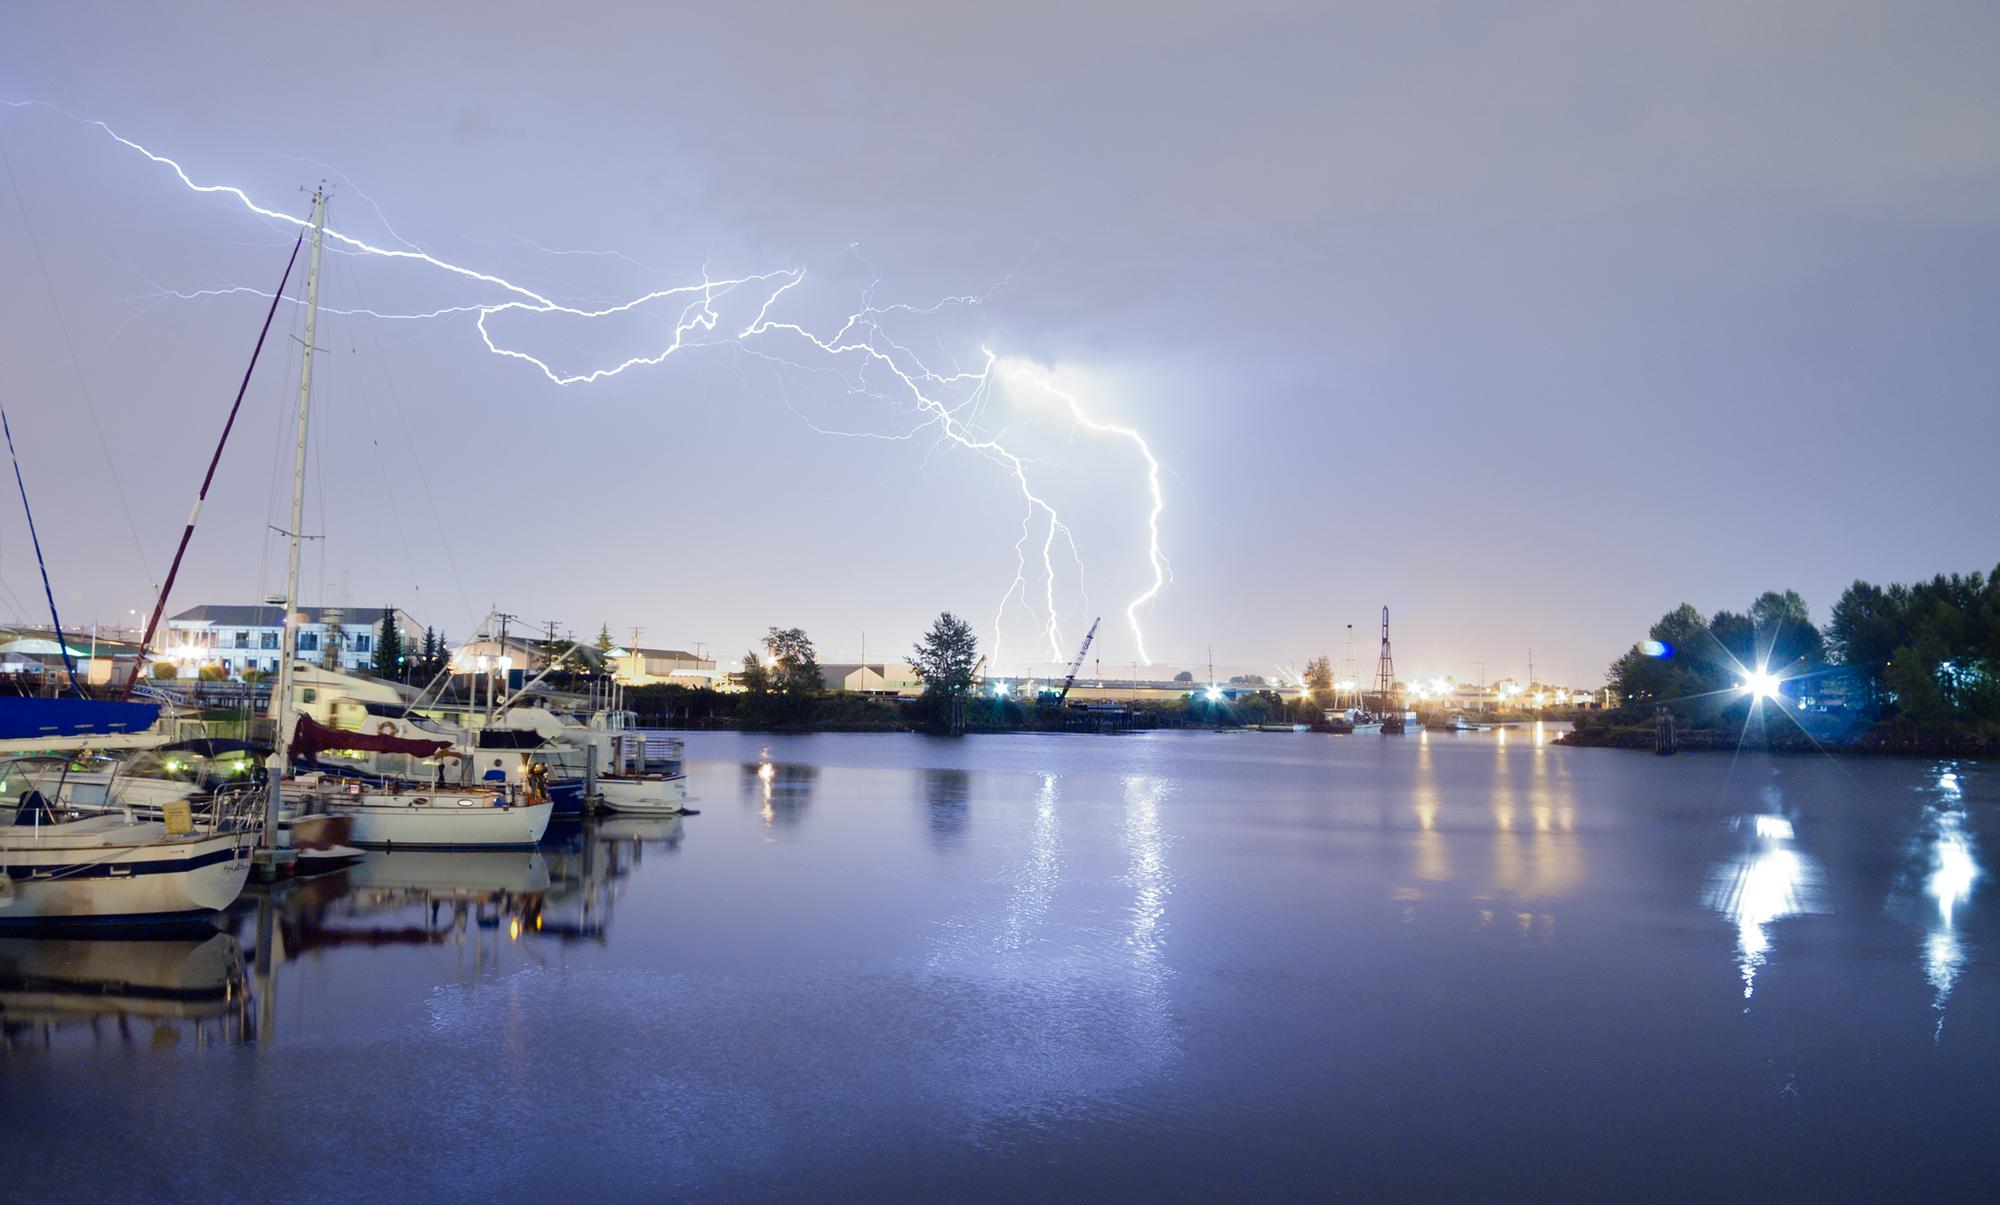 Lightning Bolts Over Boats In The water